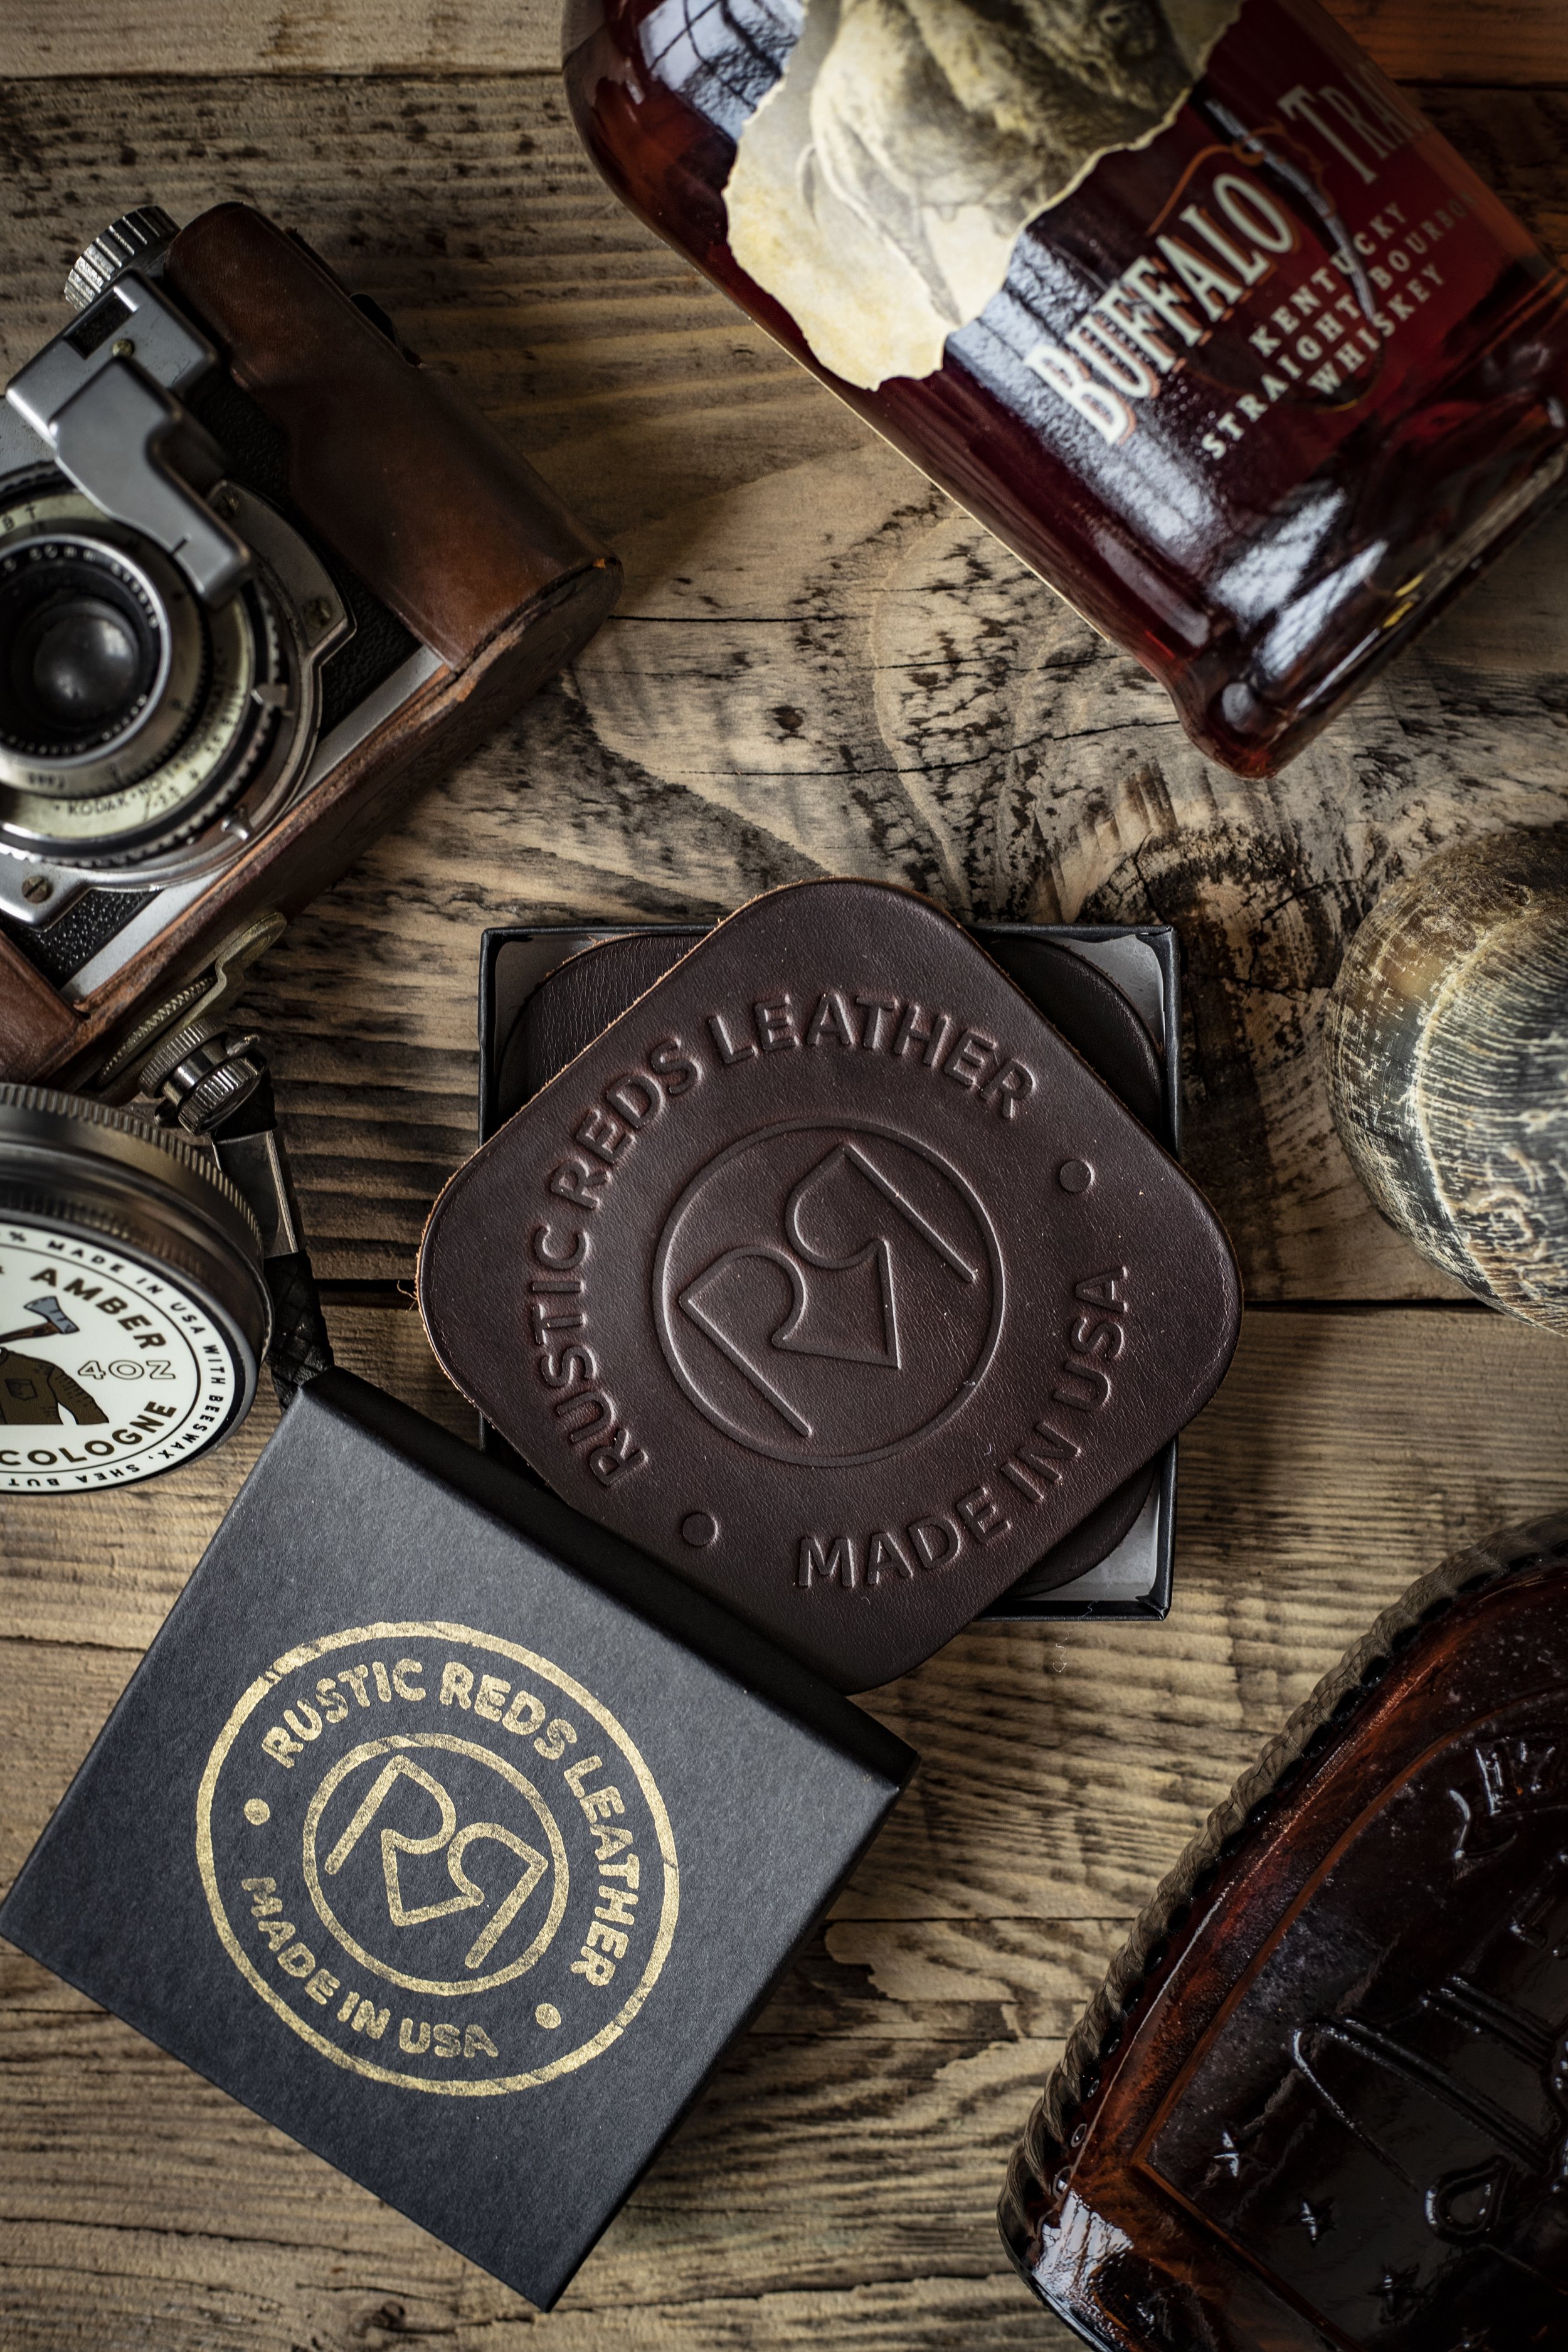 RRL Coaster Set — Rustic Red's Leather